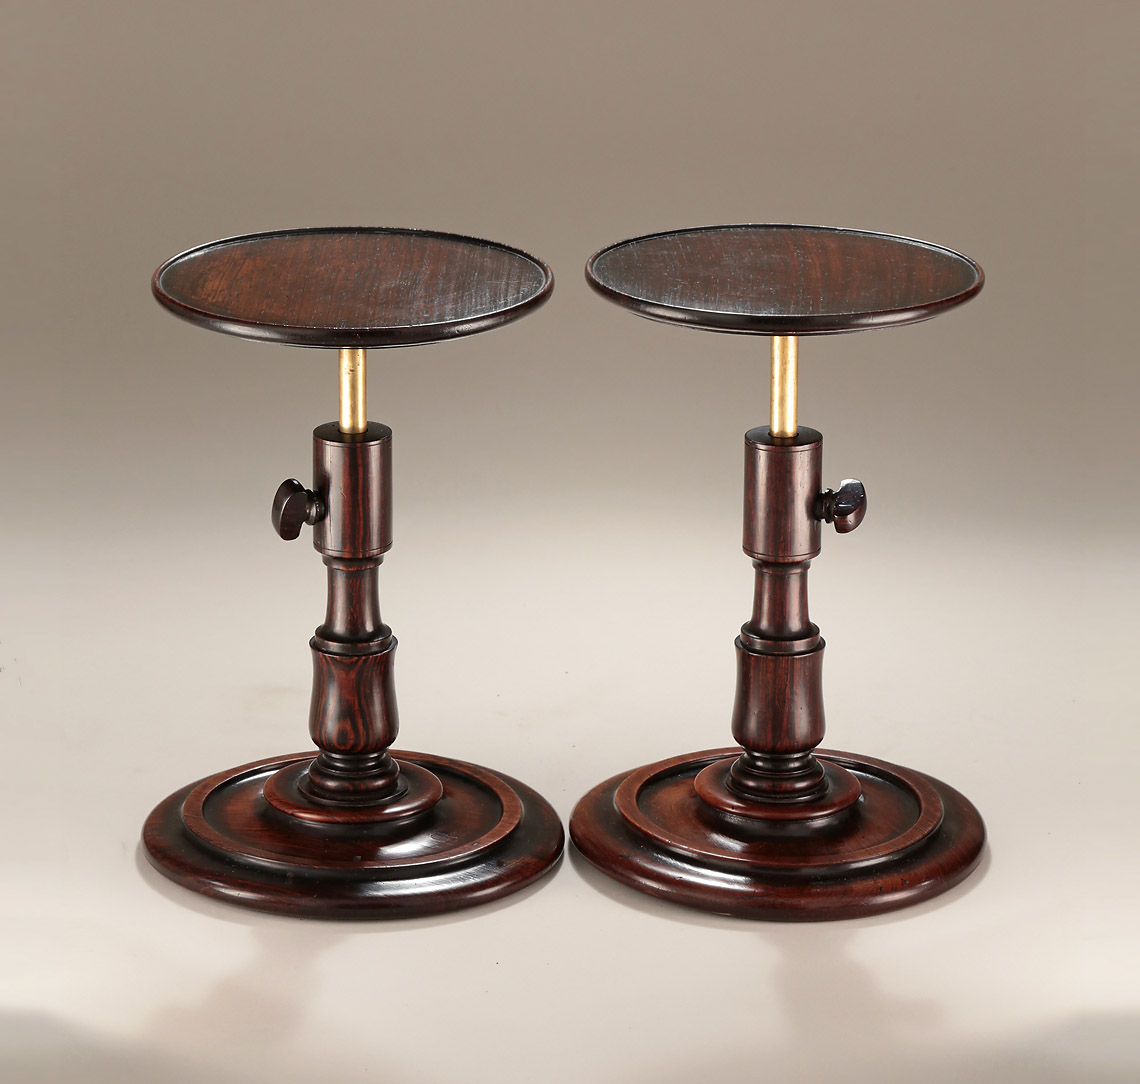 Rare Pair Georgian Turned Goncalo Alves Adjustable Candle-Stands